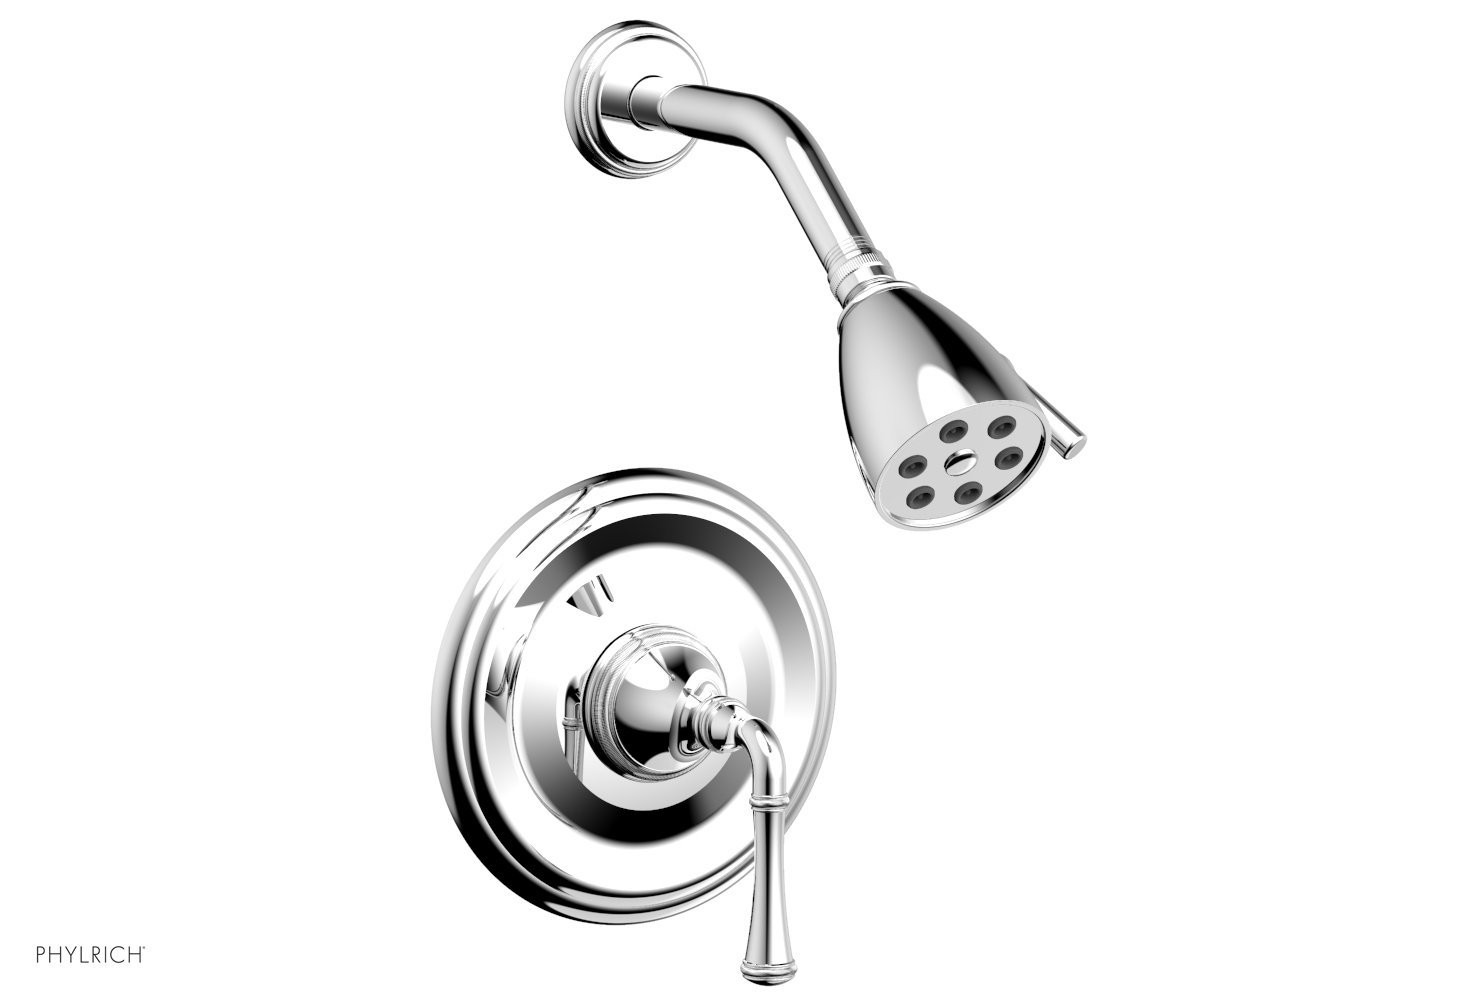 PHYLRICH 208-21 COINED WALL MOUNT PRESSURE BALANCE SHOWER SET WITH LEVER HANDLE